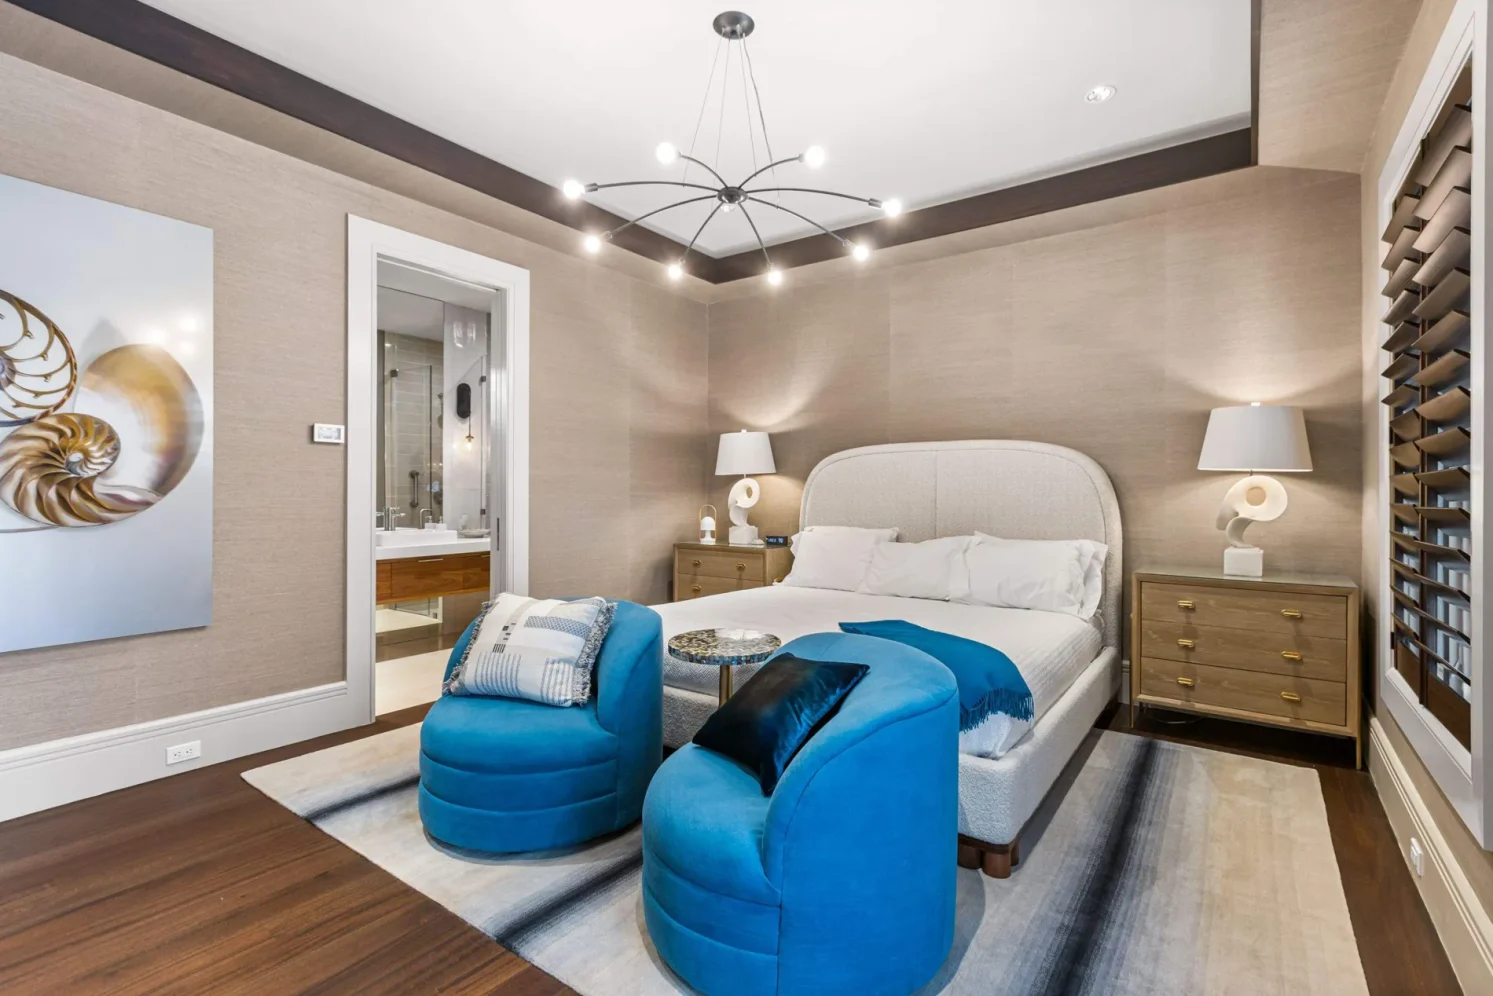 Luxury bedroom renovation at a home in Park Shore, Naples, FL